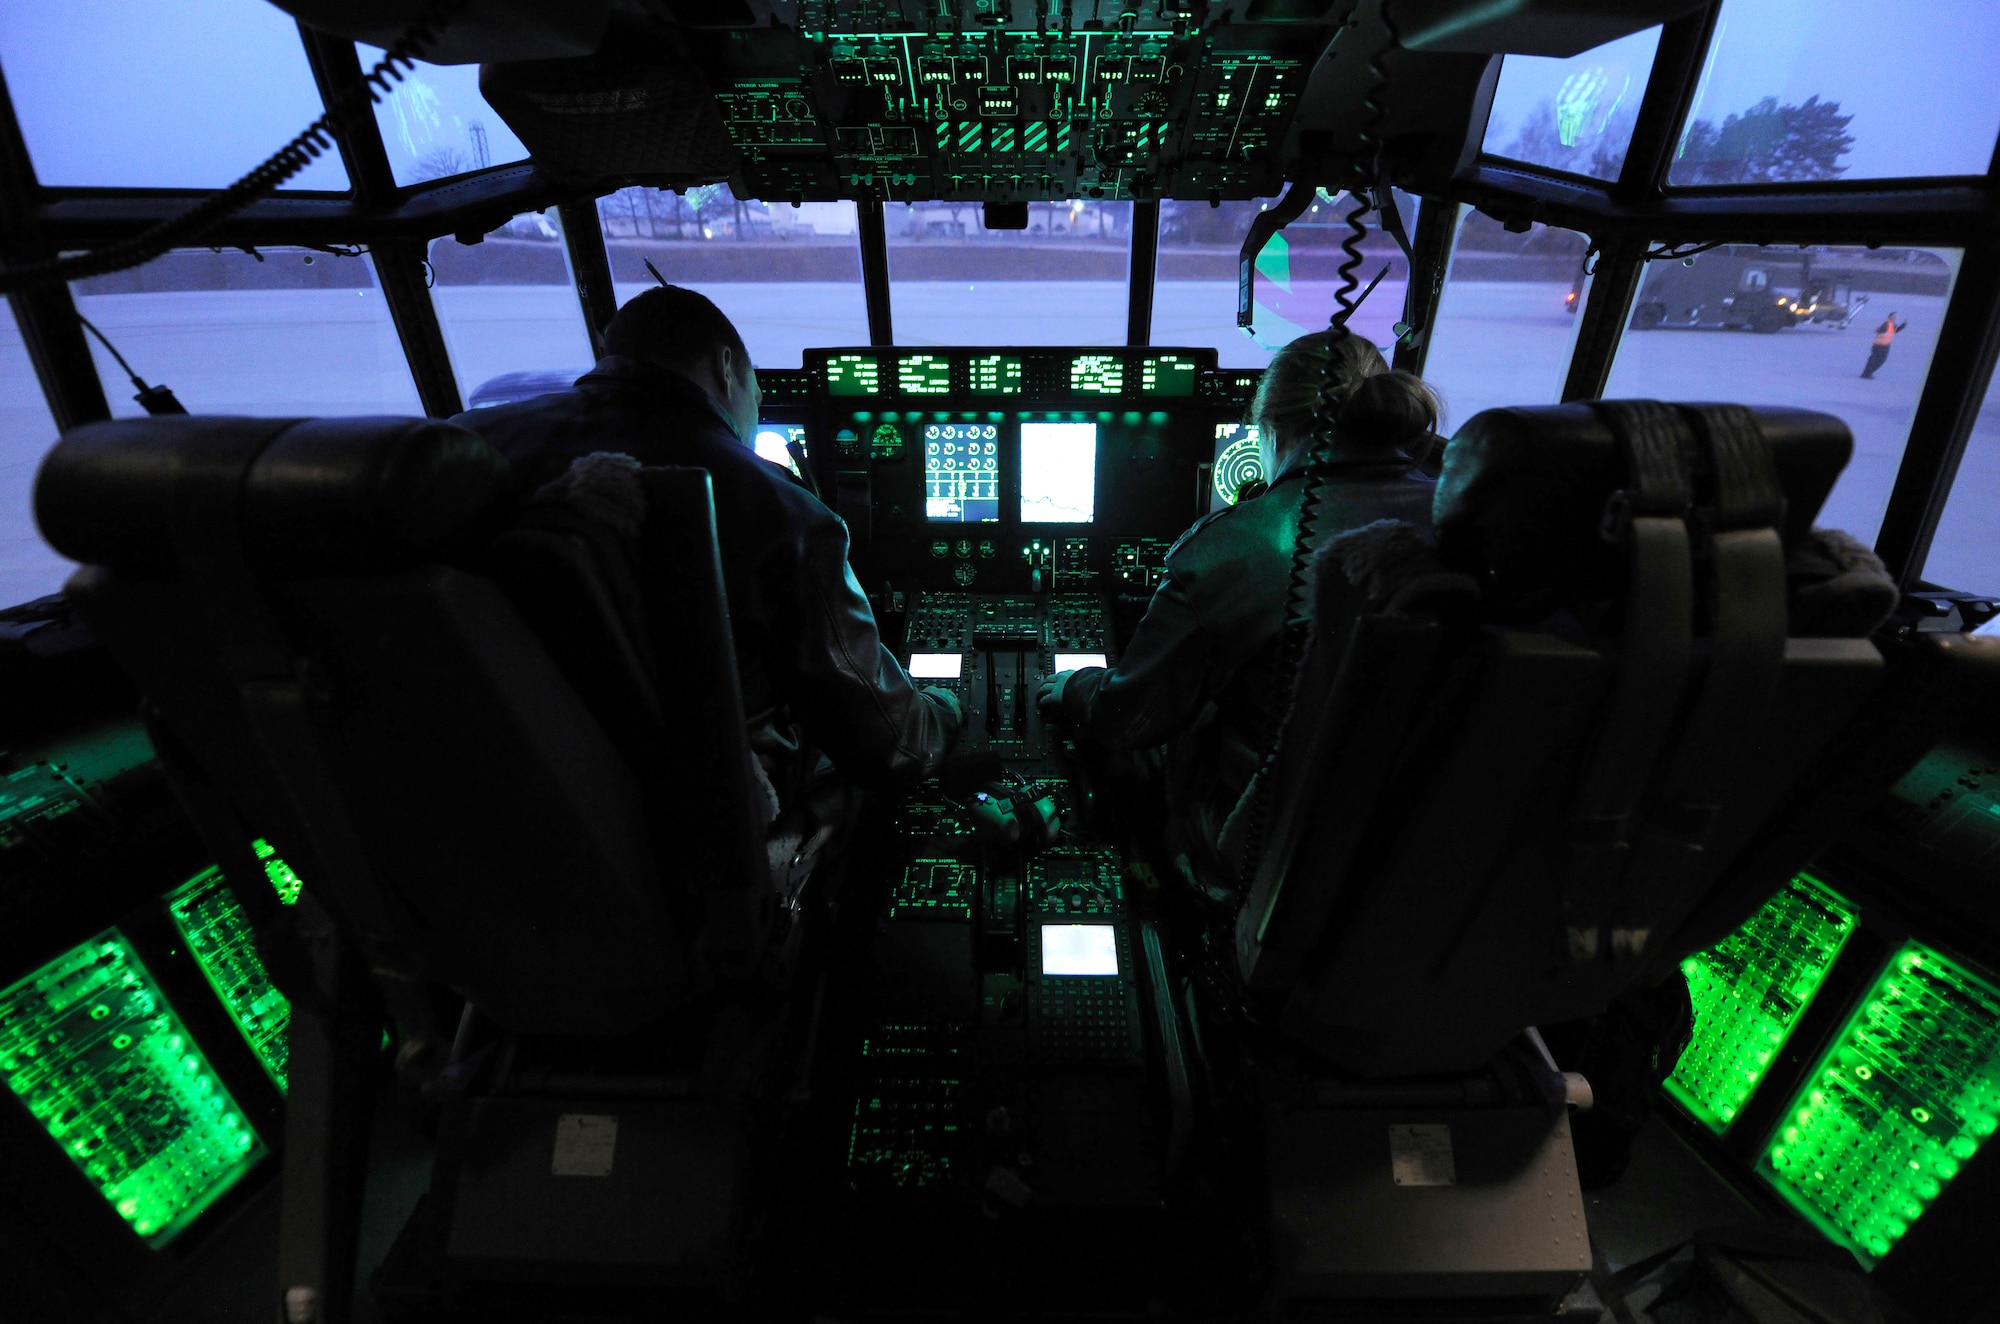 Lt. Col. Joshua Olson, 37th Airlift Squadron commander, and Capt. Marci Walton, 37th Airlift Squadron instructor pilot, go through the pre-flight checklist in the flight deck of a C-130J, March 16, 2012 at Ramstein Air Base, Germany.  The 37th AS completed a week-long airdrop training exercise with a 
ten-bundle container deployment system at a drop zone near Grafenwoehr, Germany.  (U.S. Air Force photo/Staff Sgt. Chris Willis)
